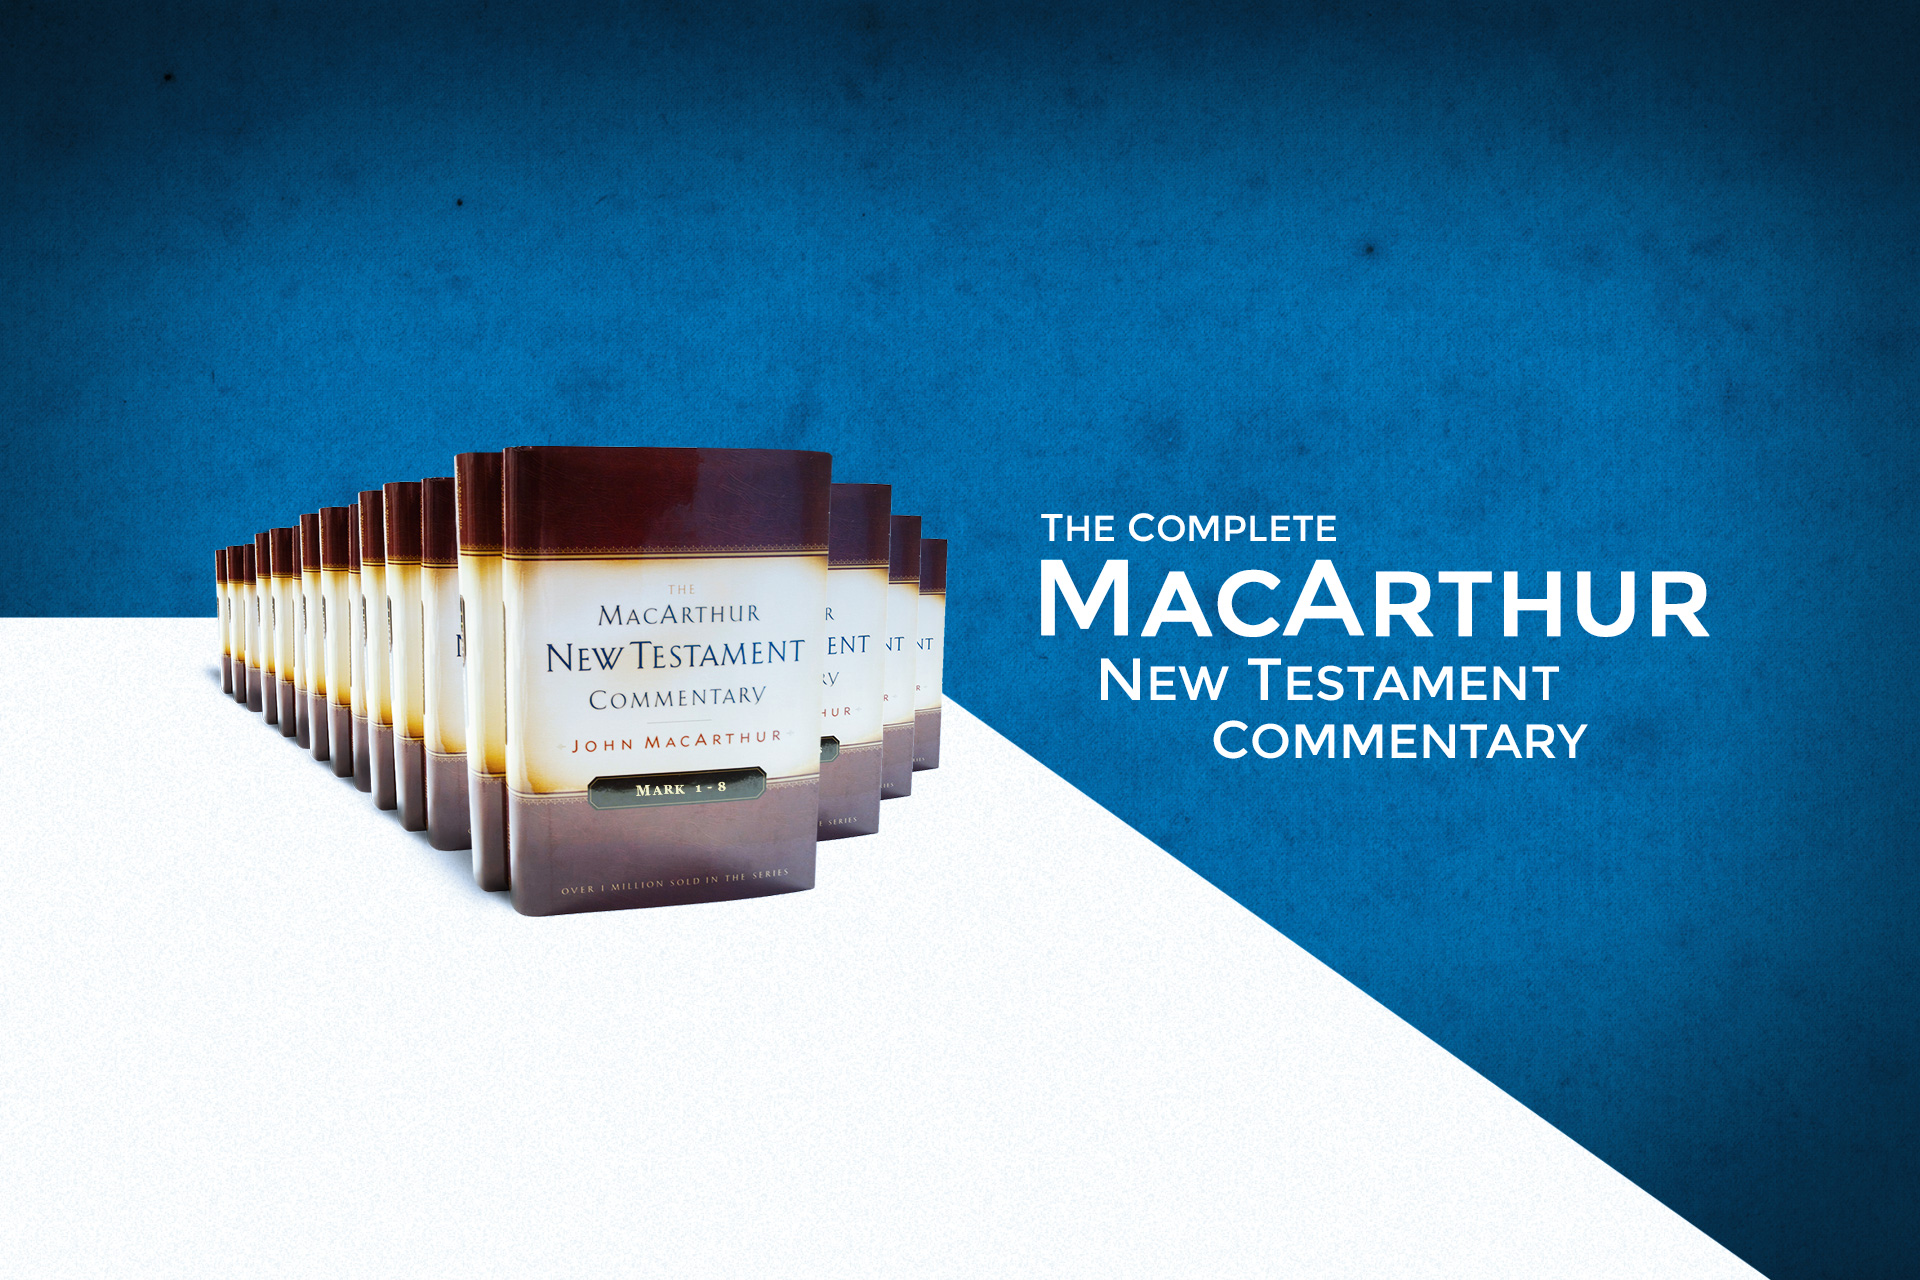 The MacArthur New Testament Commentaries